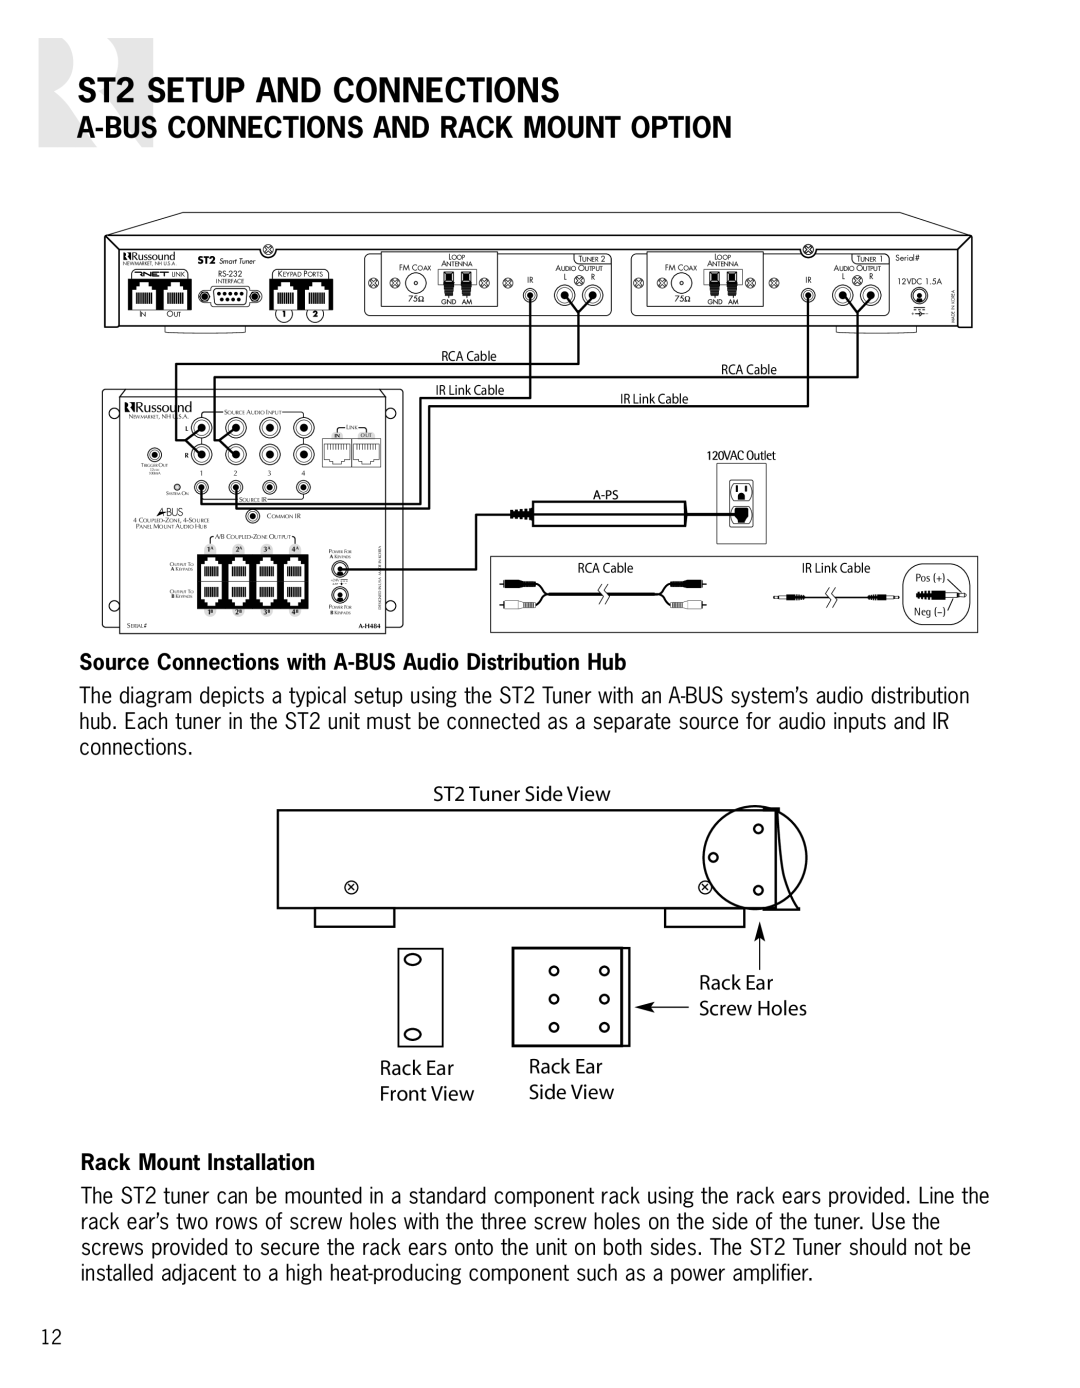 Russound ST2 A-Bus Connections And Rack Mount Option, Source Connections with A-BUS Audio Distribution Hub 